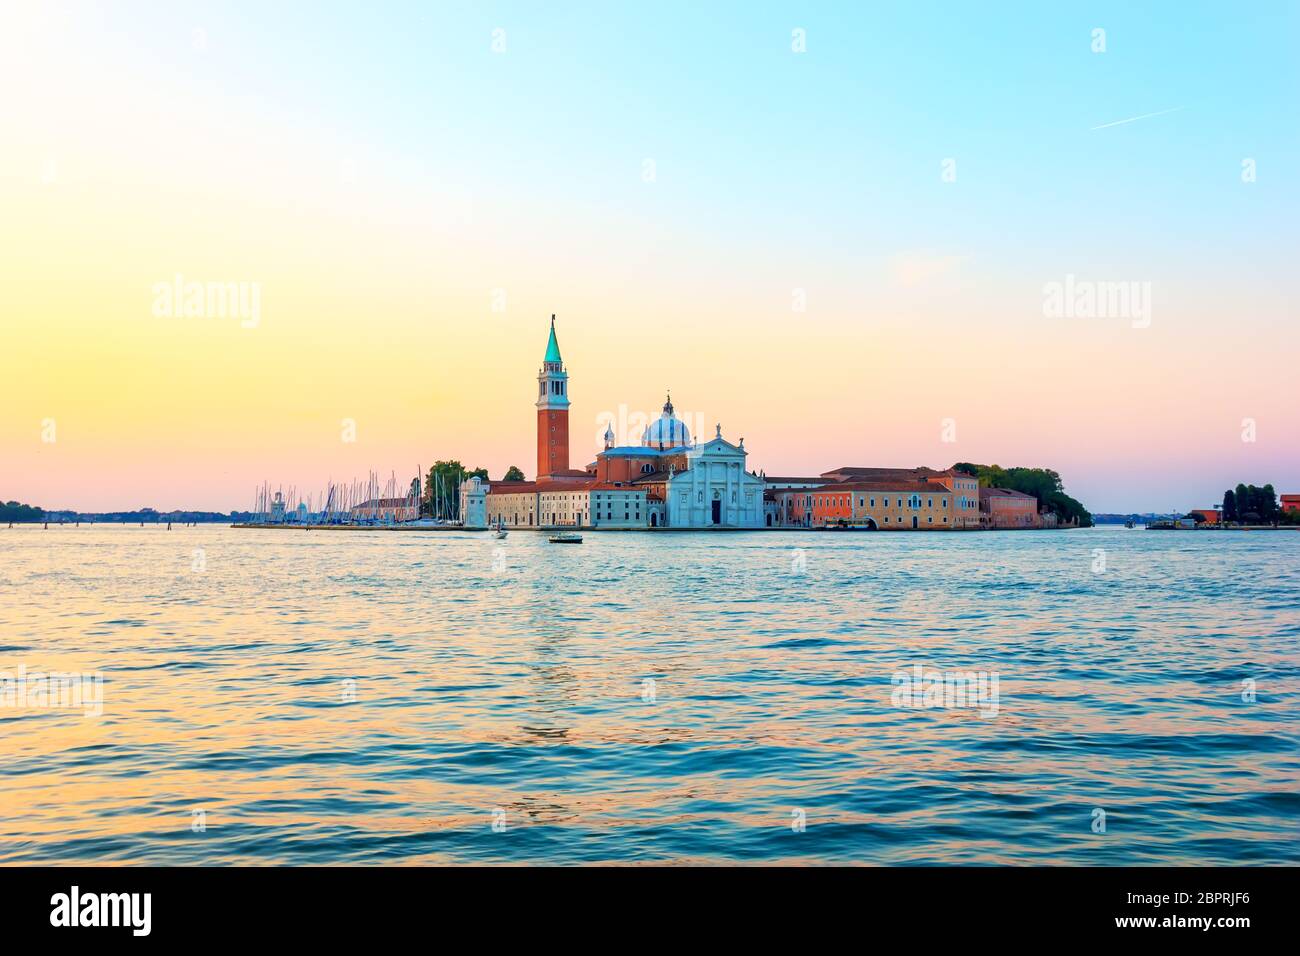 San Giorgio Maggiore island at sunrise, view from the pier near Doge's Palace. Stock Photo